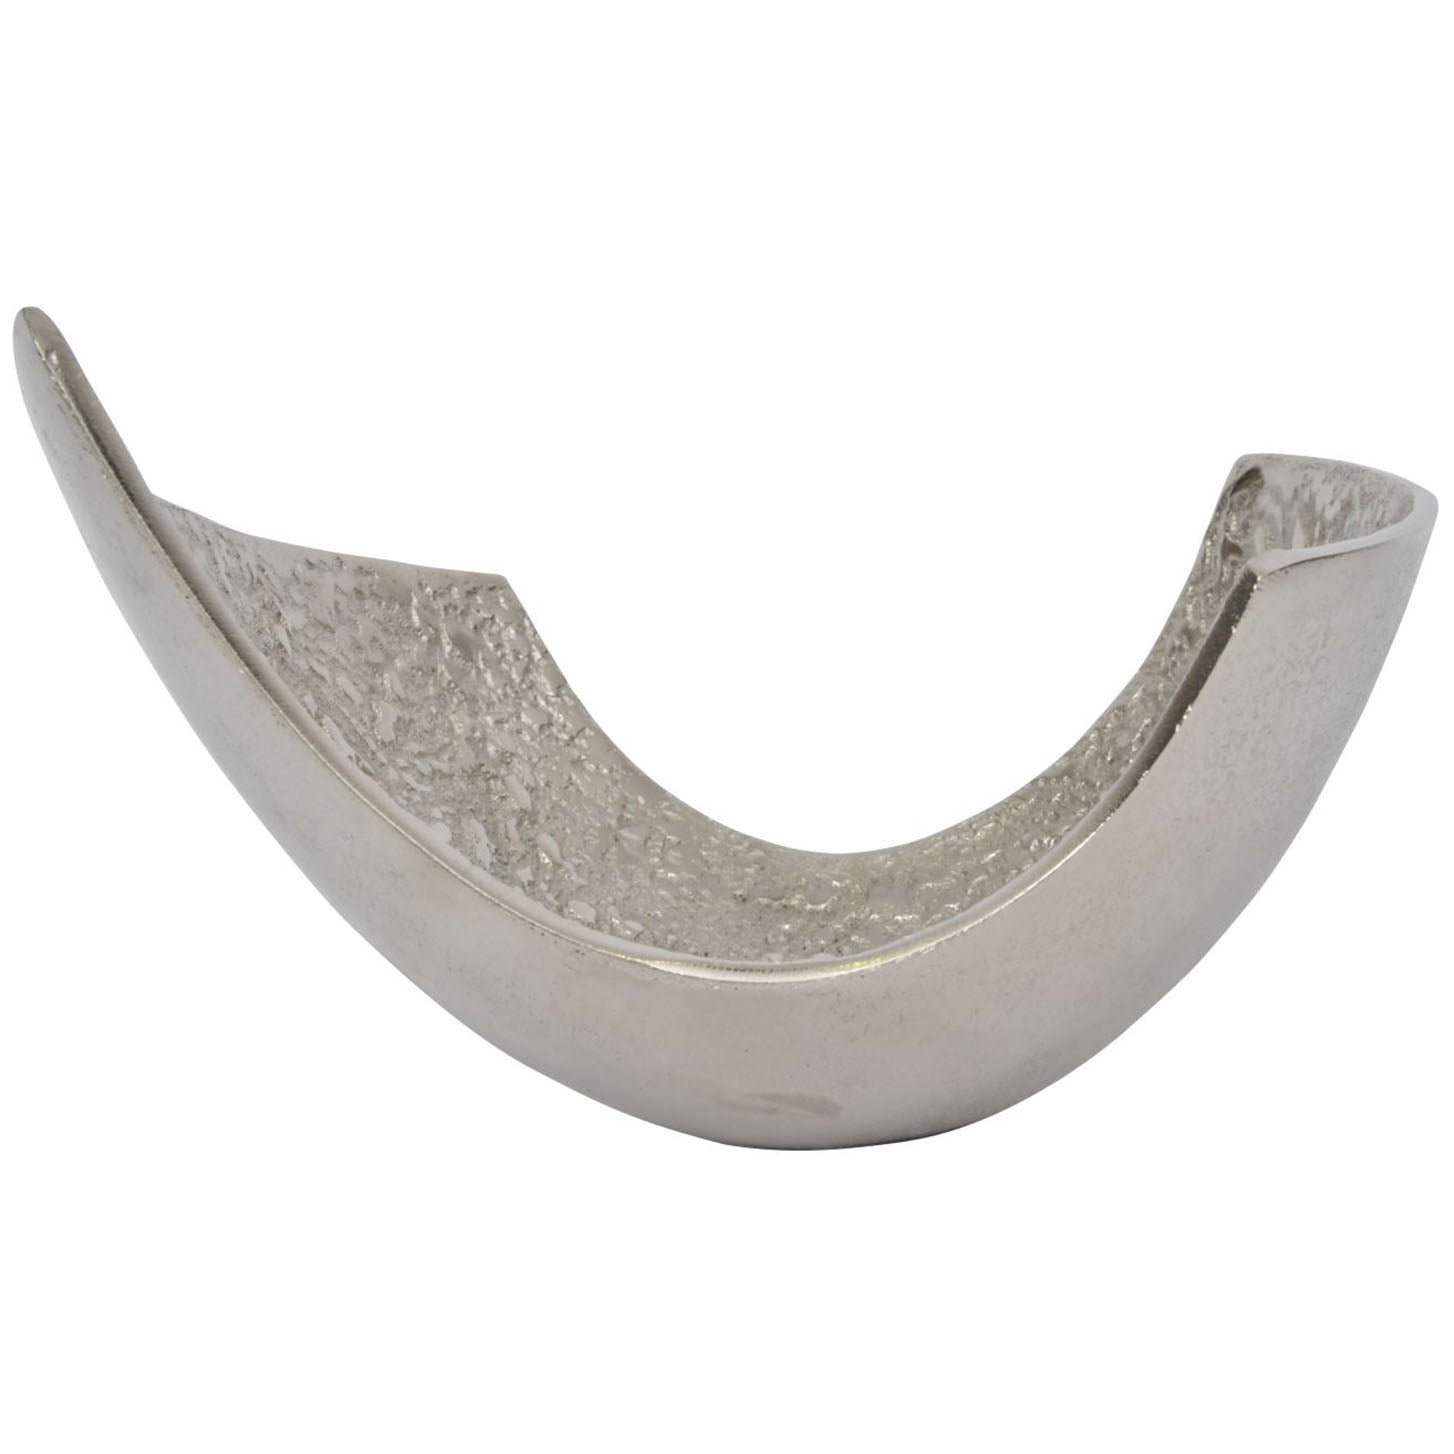 Iconic Silver Peel Bowl Small